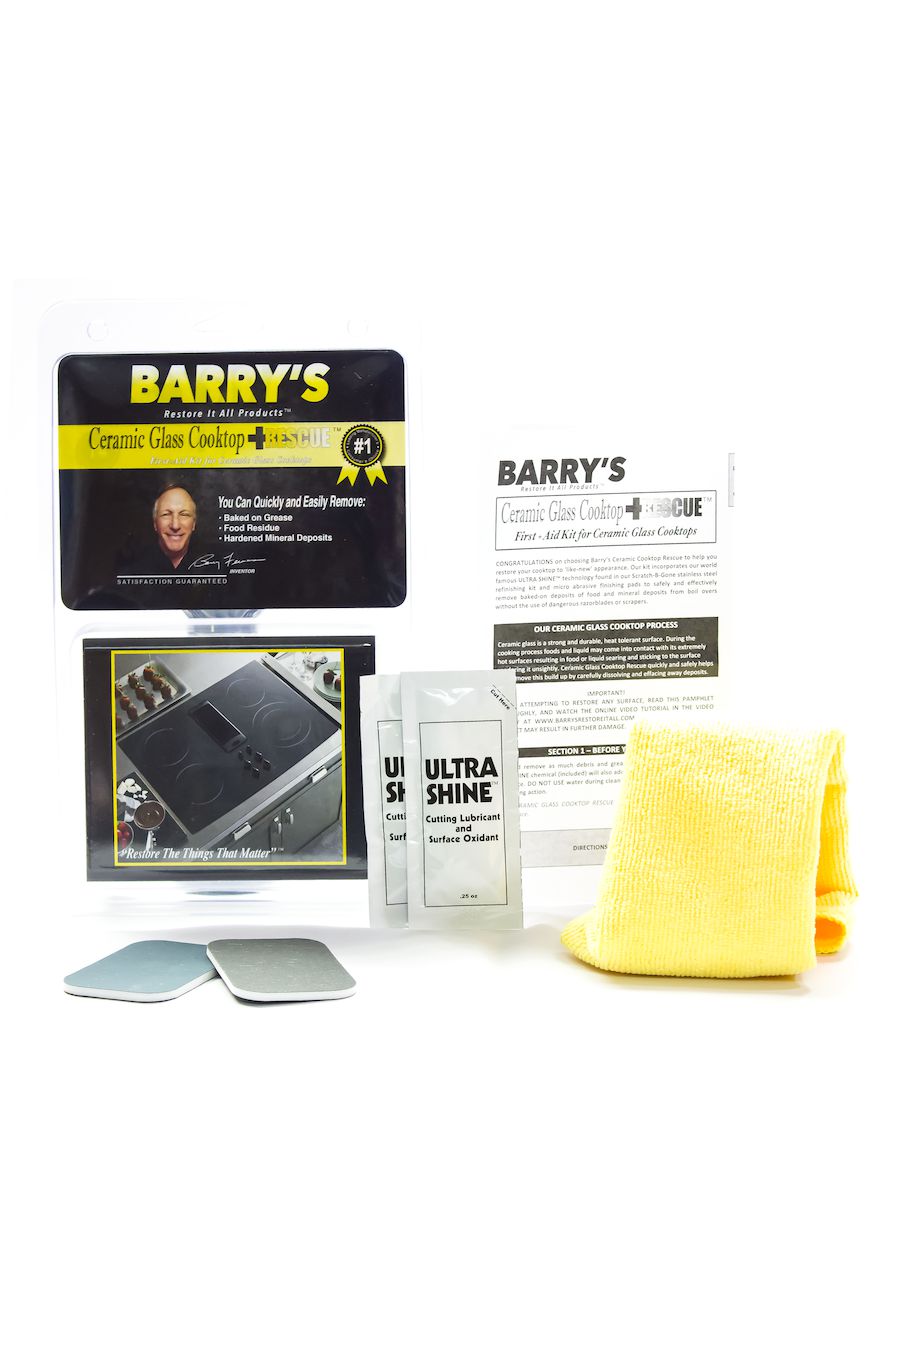 Barry's Restore It All Products Ceramic Glass Cooktop Rescue Kit